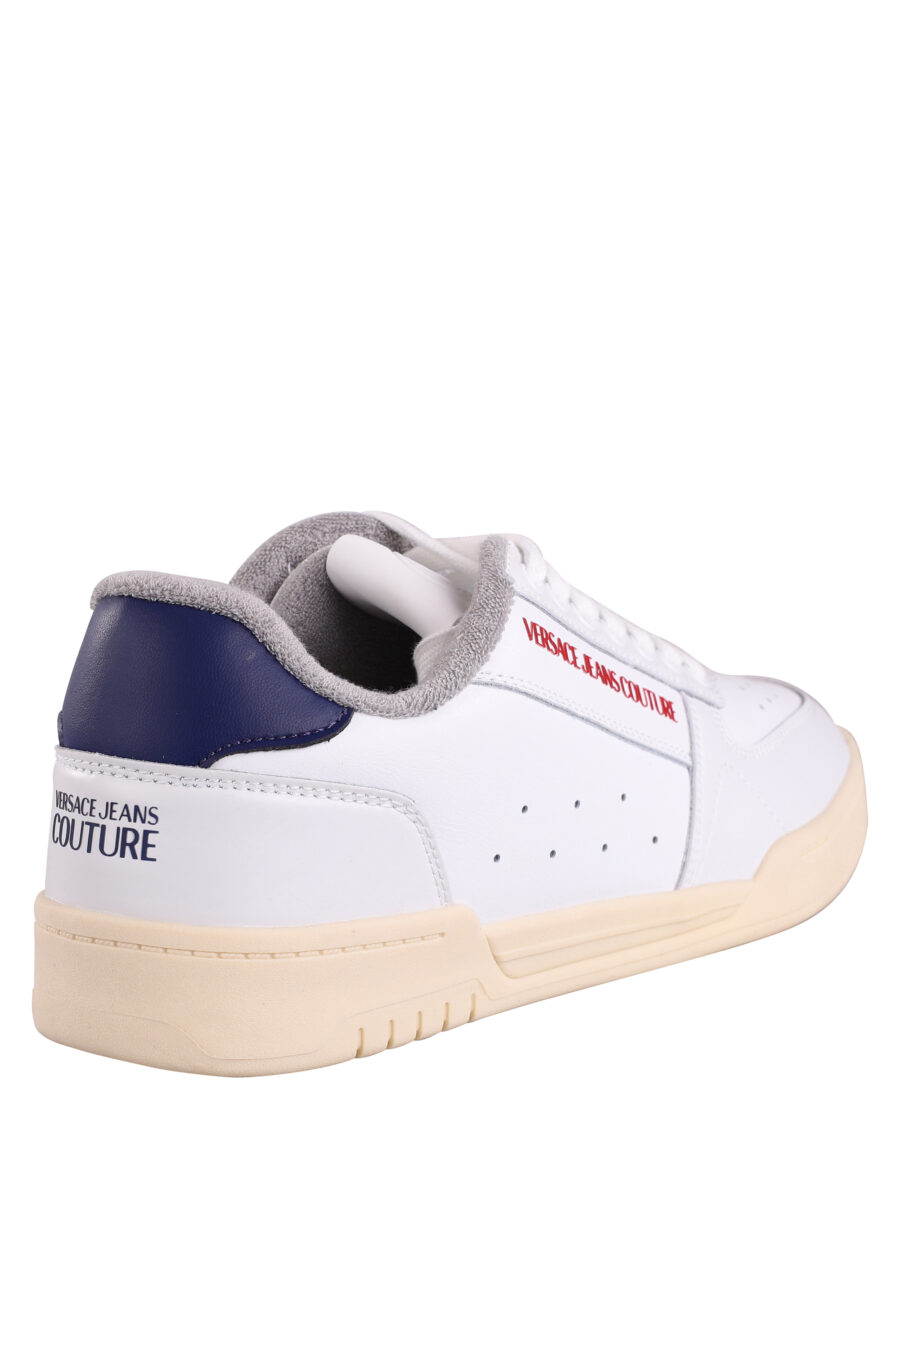 White trainers with red mini logo and blue detail - IMG 9025